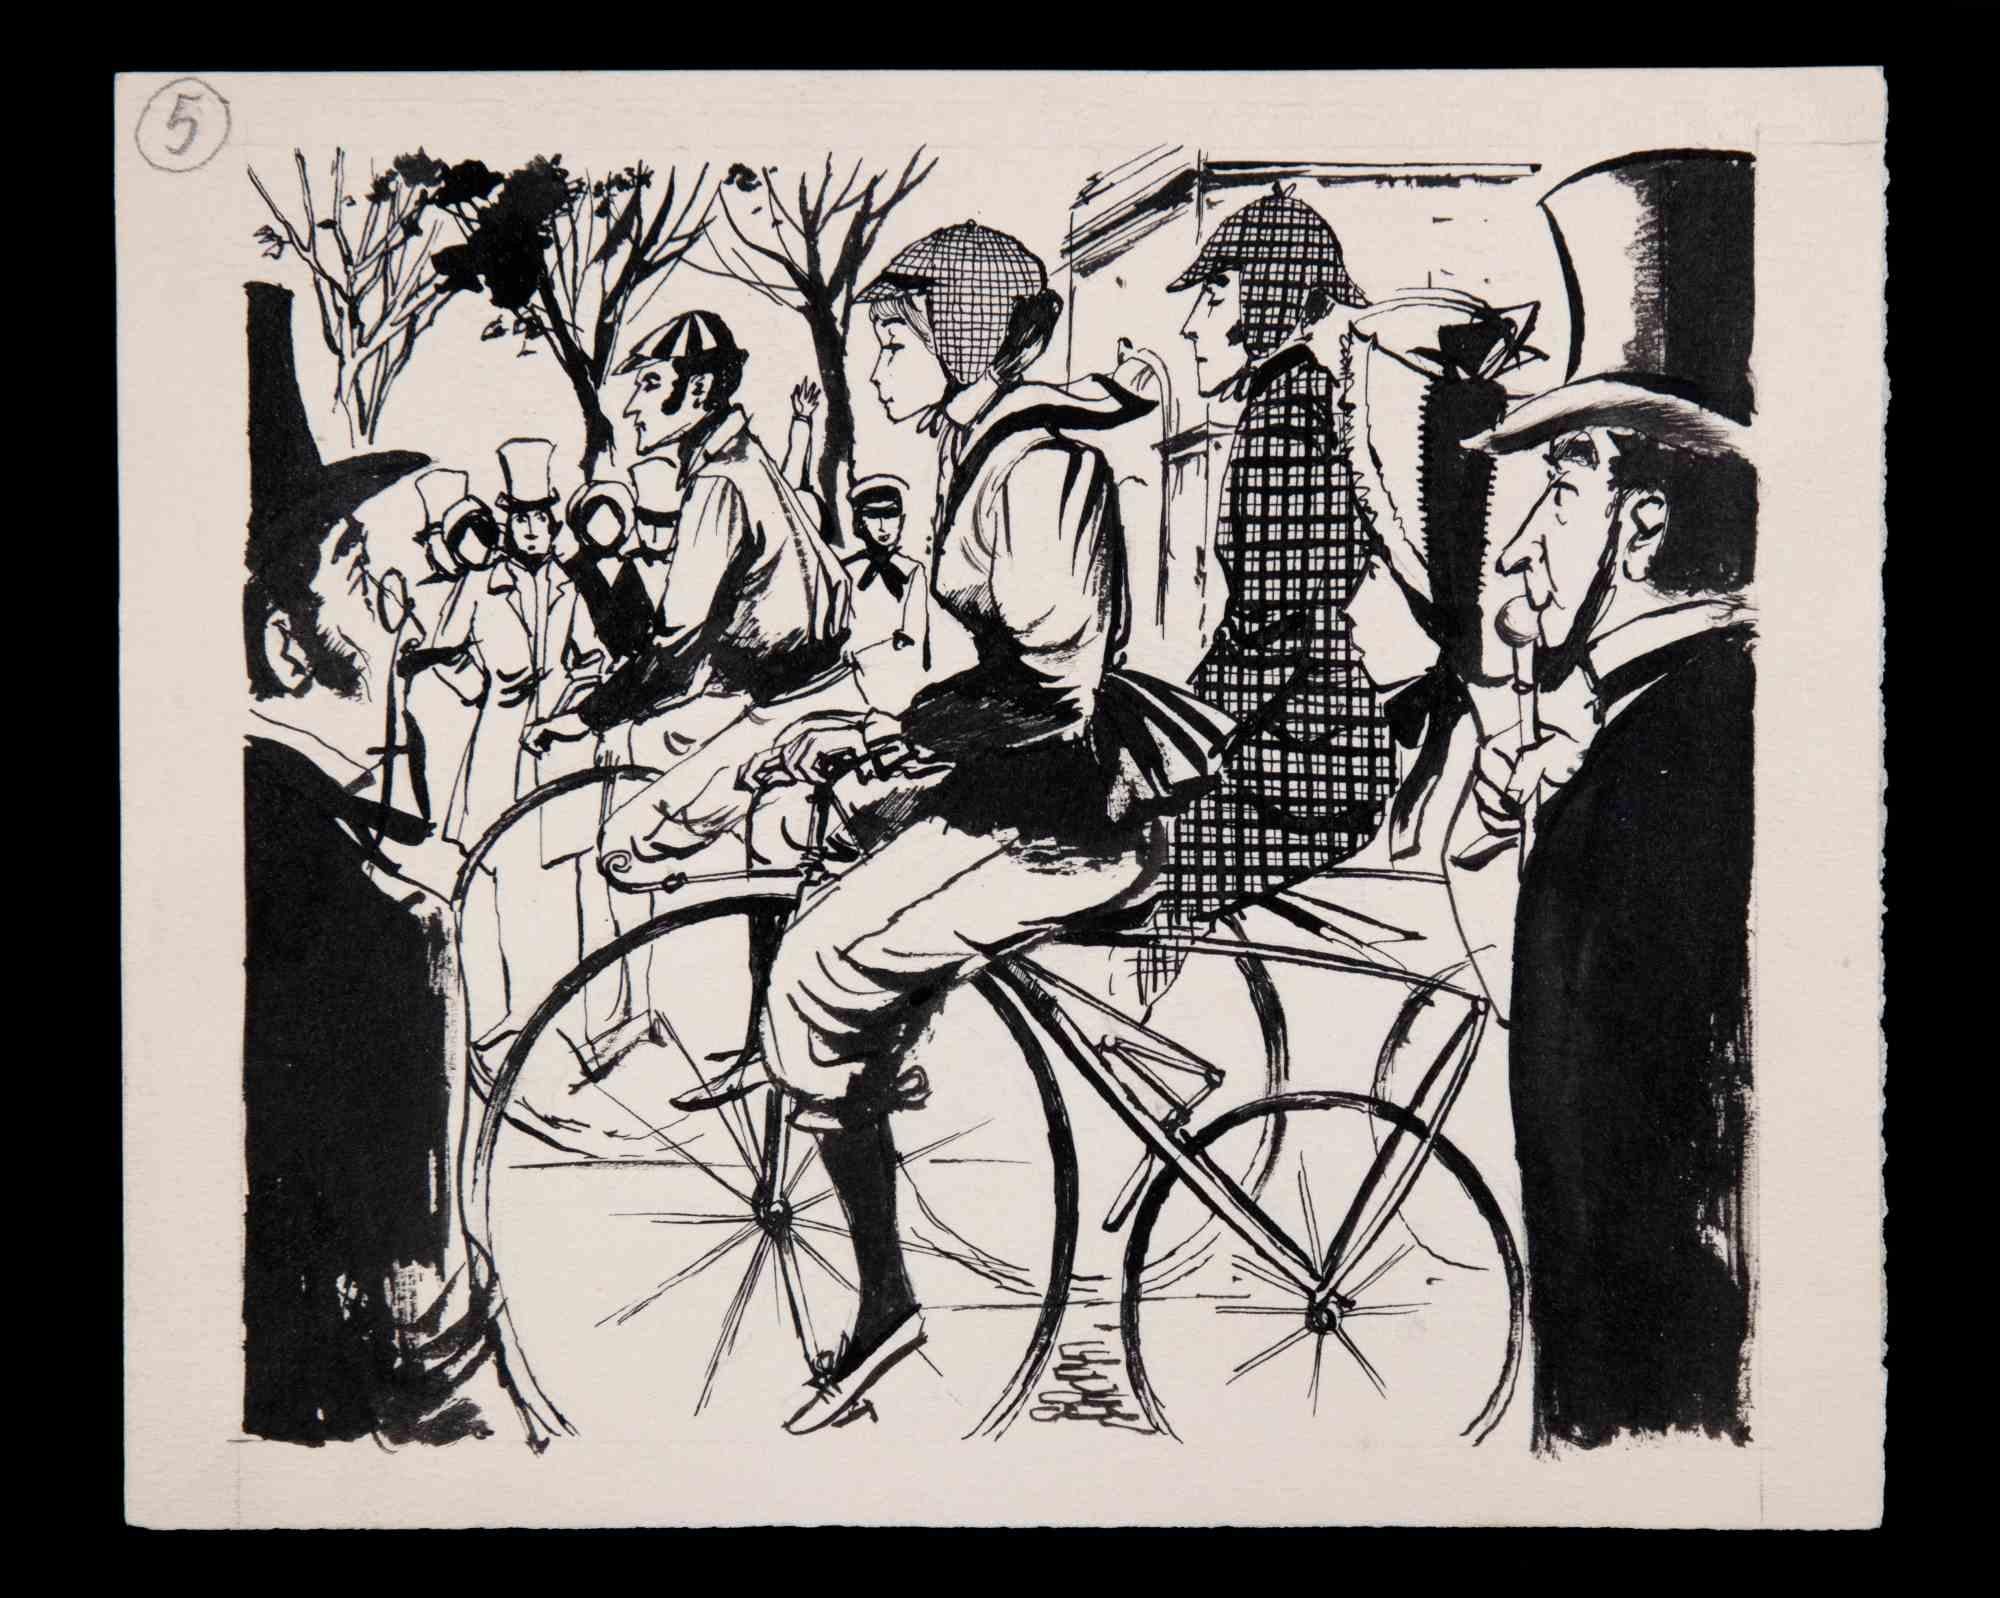 Bike People is an original China Ink Drawing realized by Norbert Meyre.

The little artwork on a yellowed paper is in good condition.

No Signature.

Norbert Meyre is a French Illustrator of 20th century.

